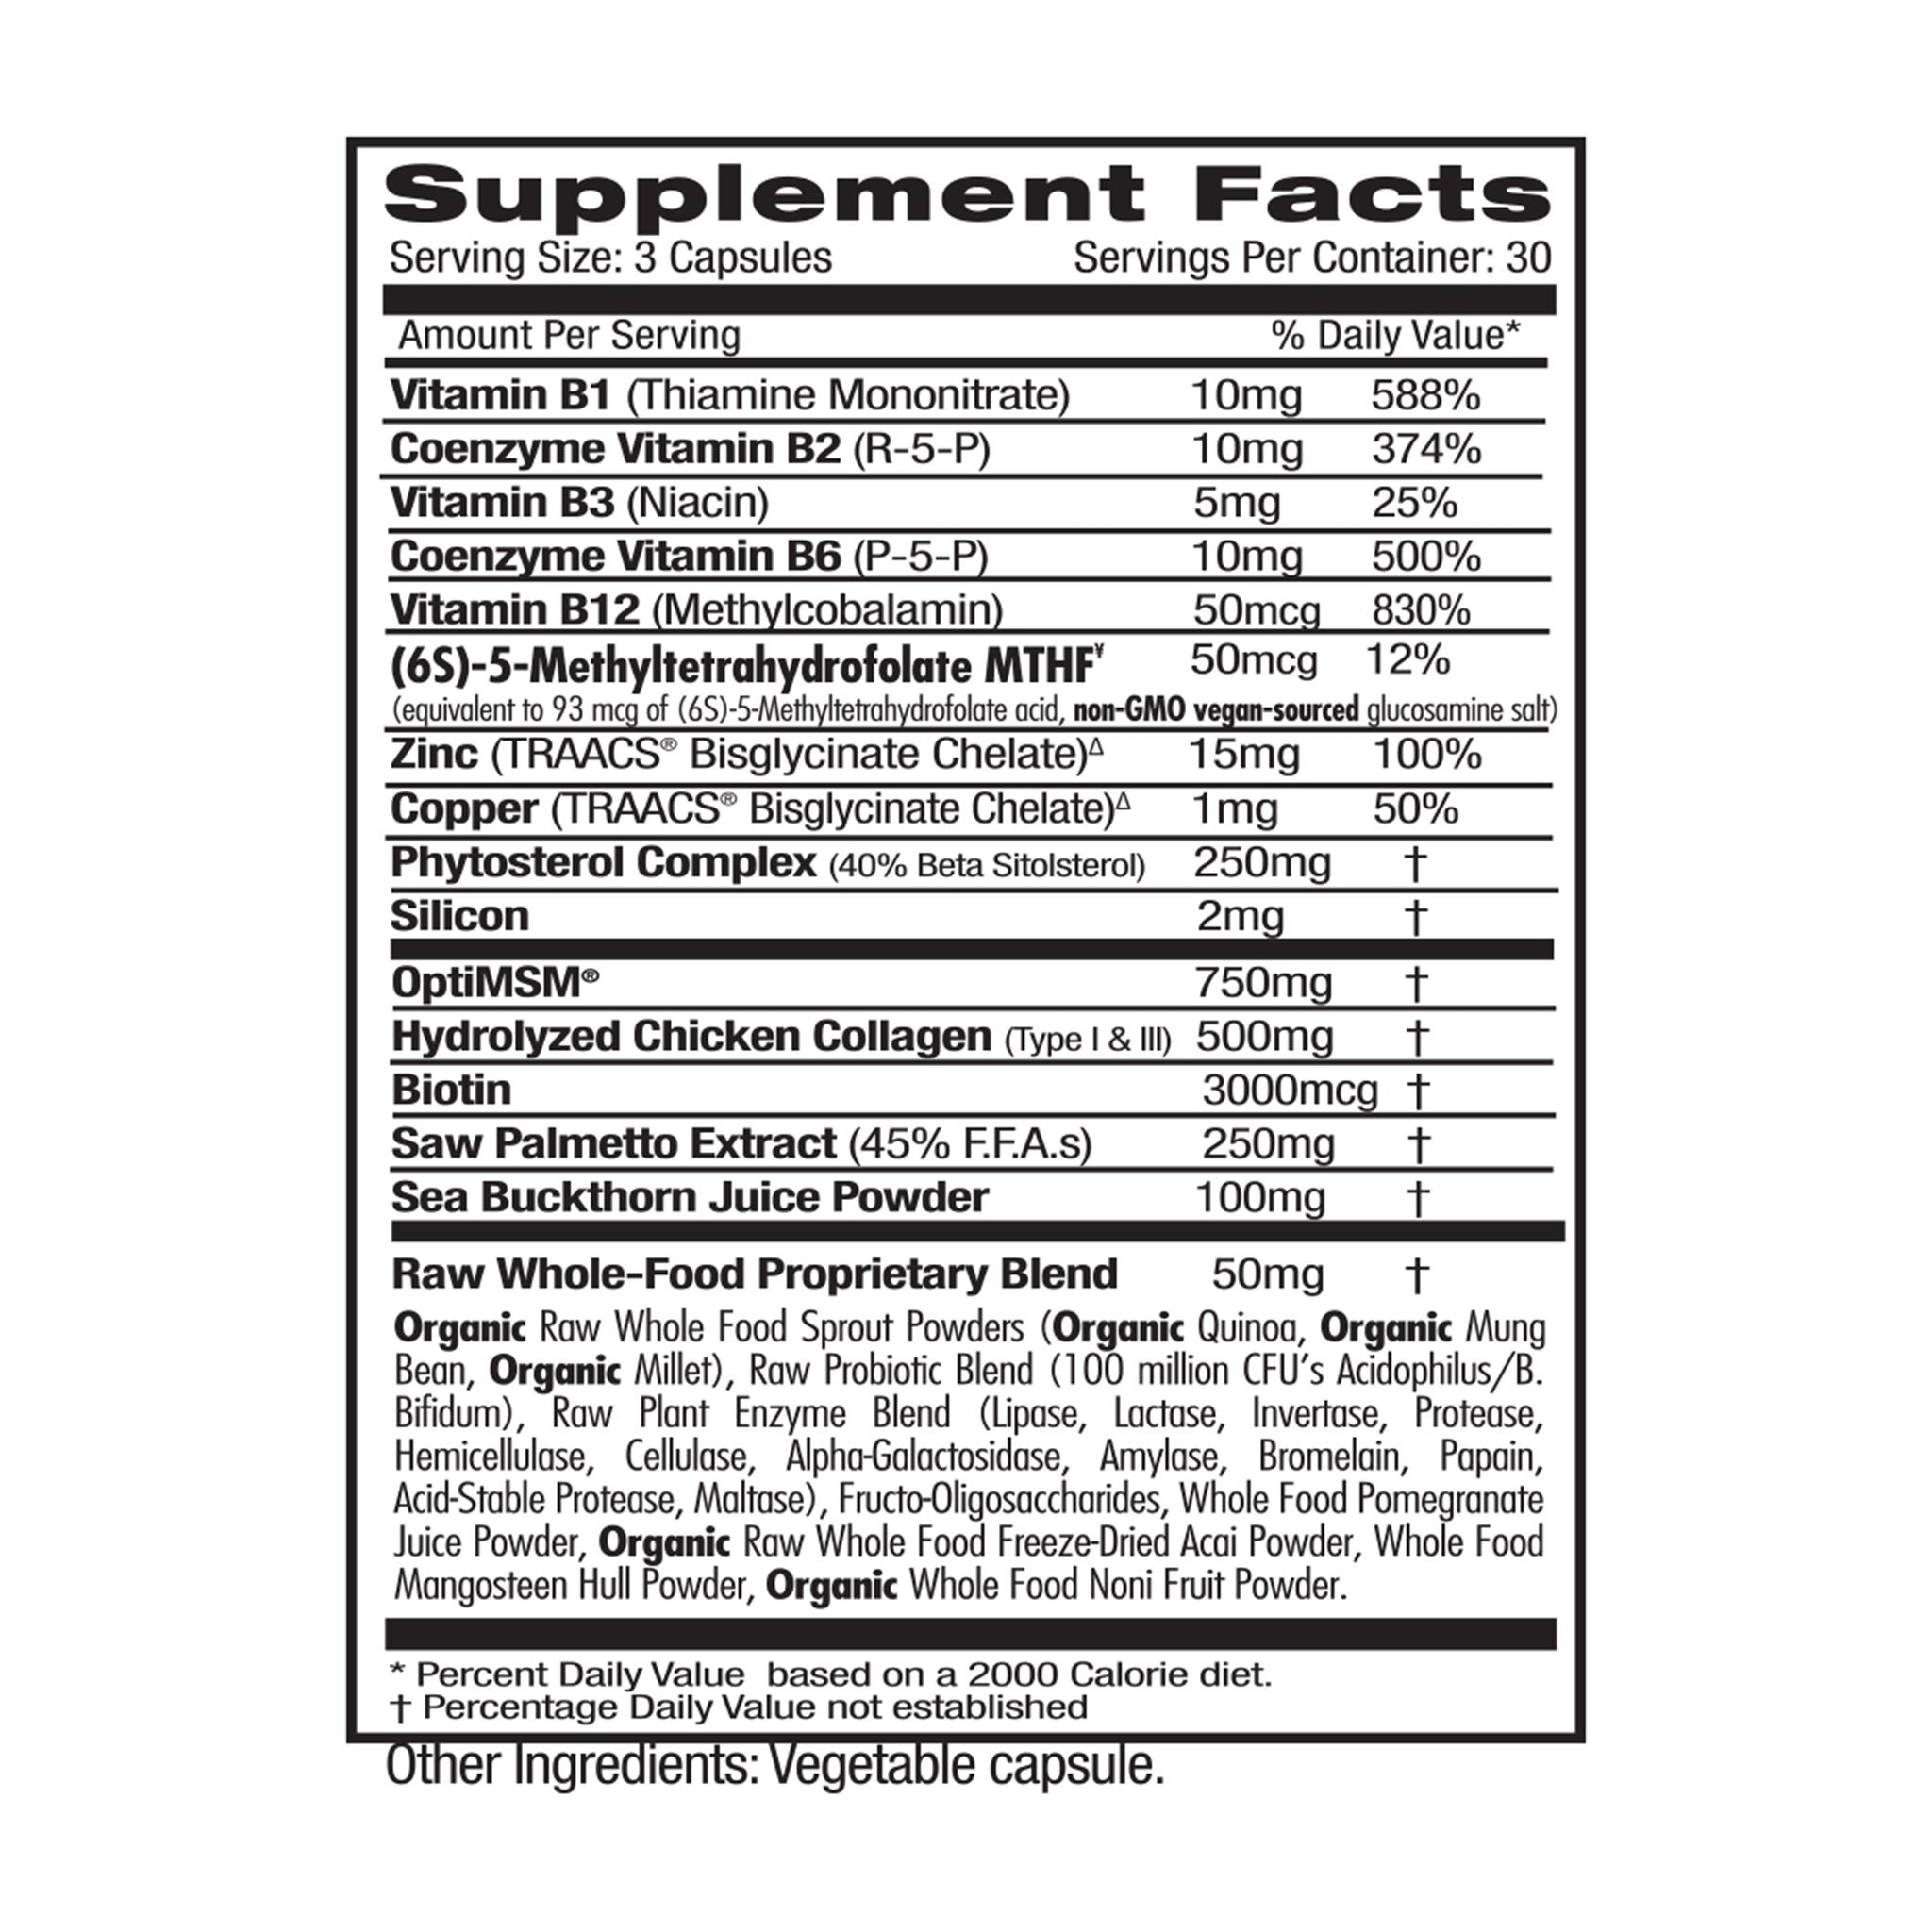 Supplement Facts for Collagen Hair, Skin & Nails